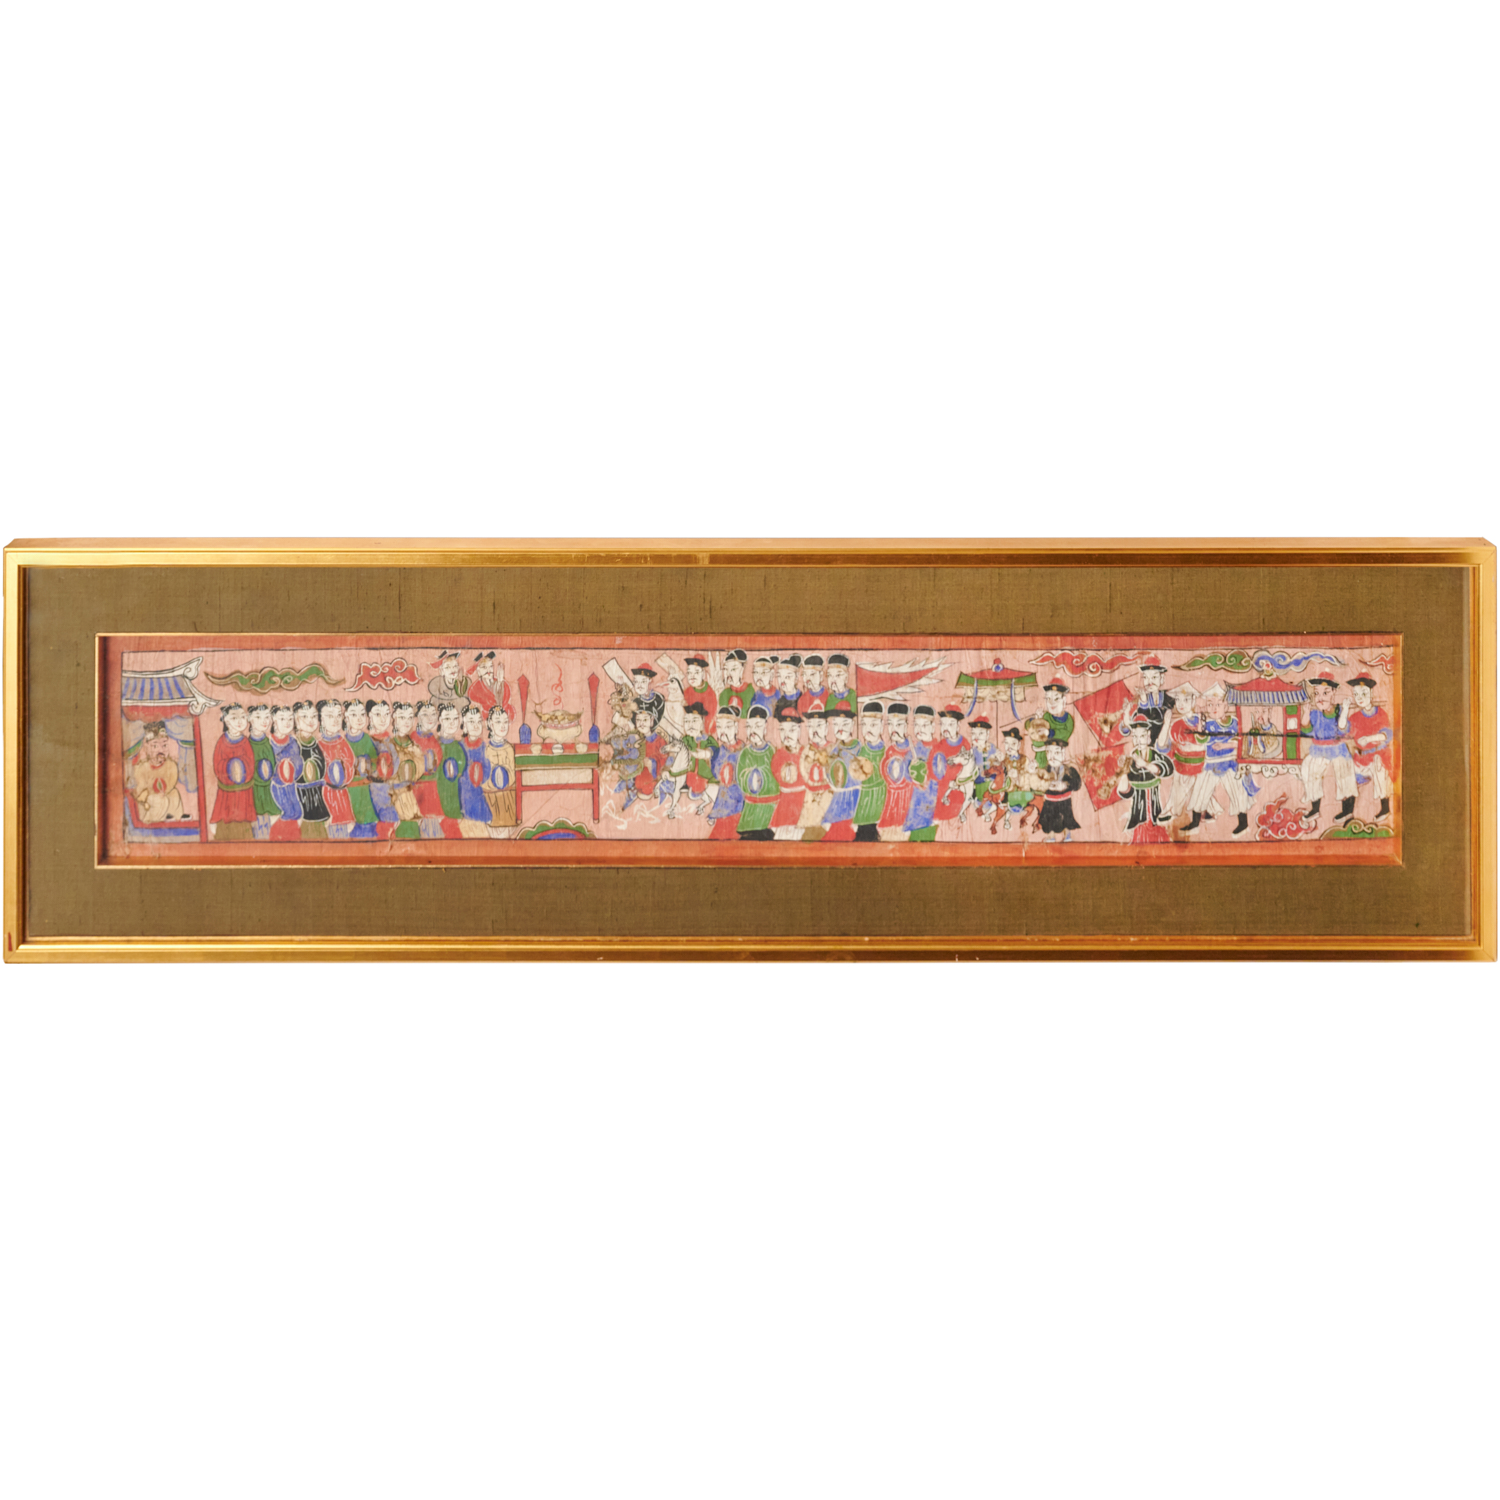 YAO PEOPLE TRIBAL ANTIQUE PAINTING 2ce0eb